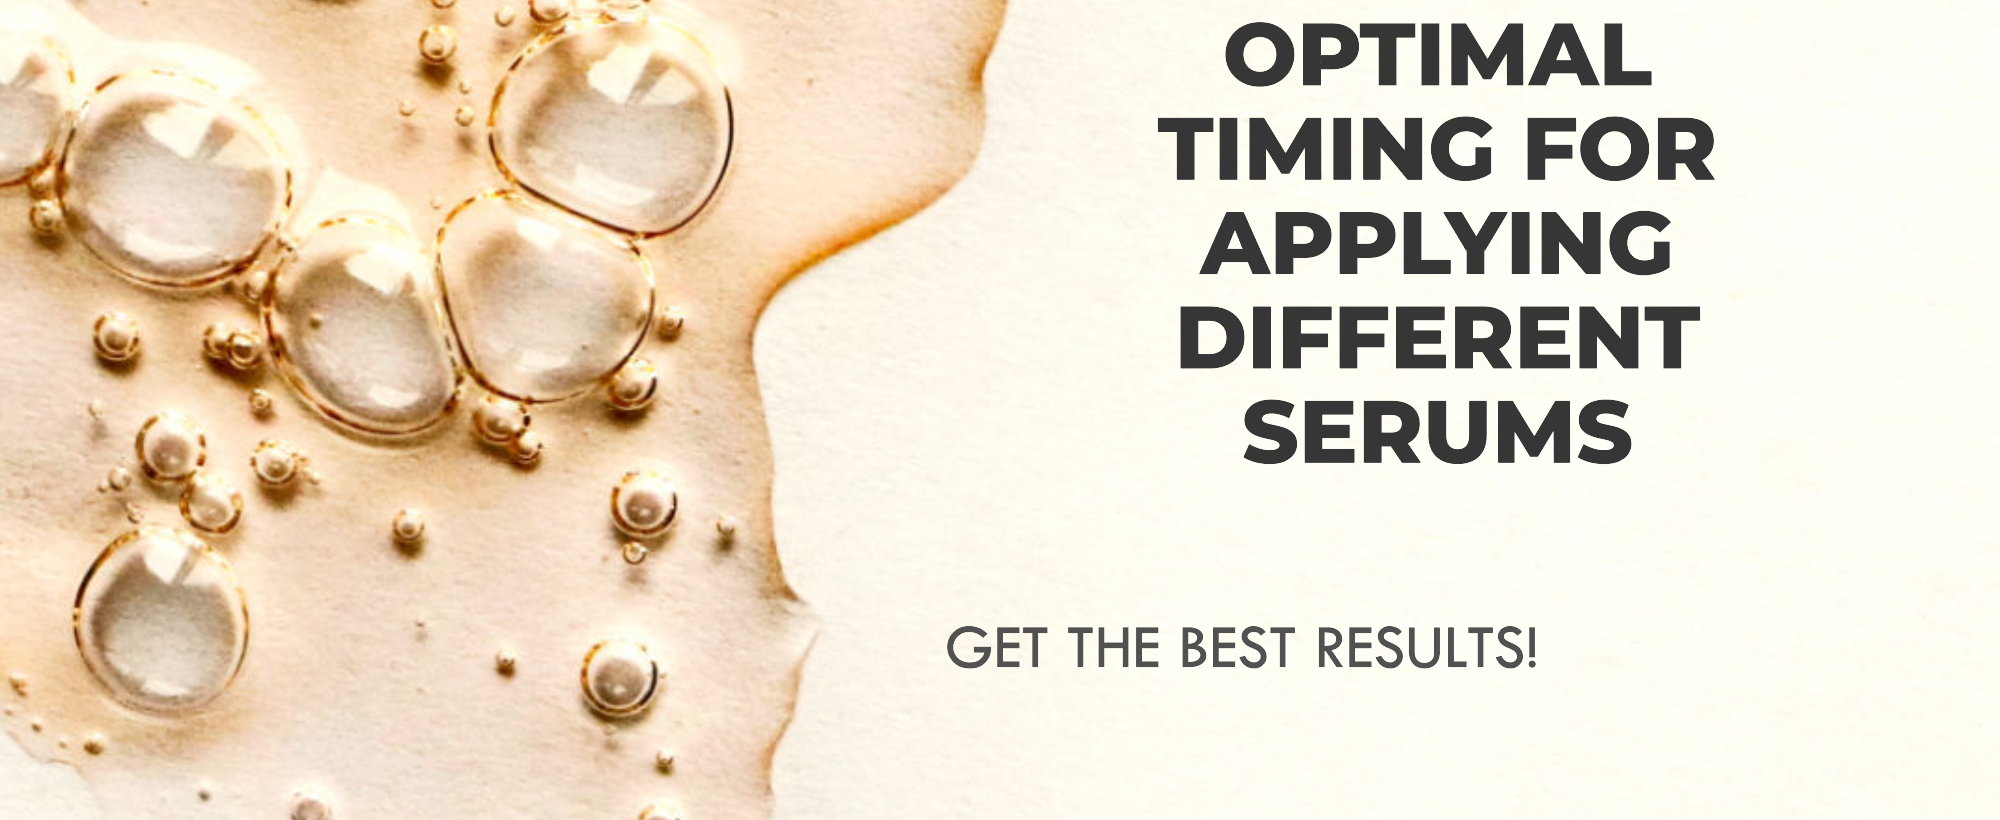 Optimal Timing for Applying Various Serums Throughout the Day